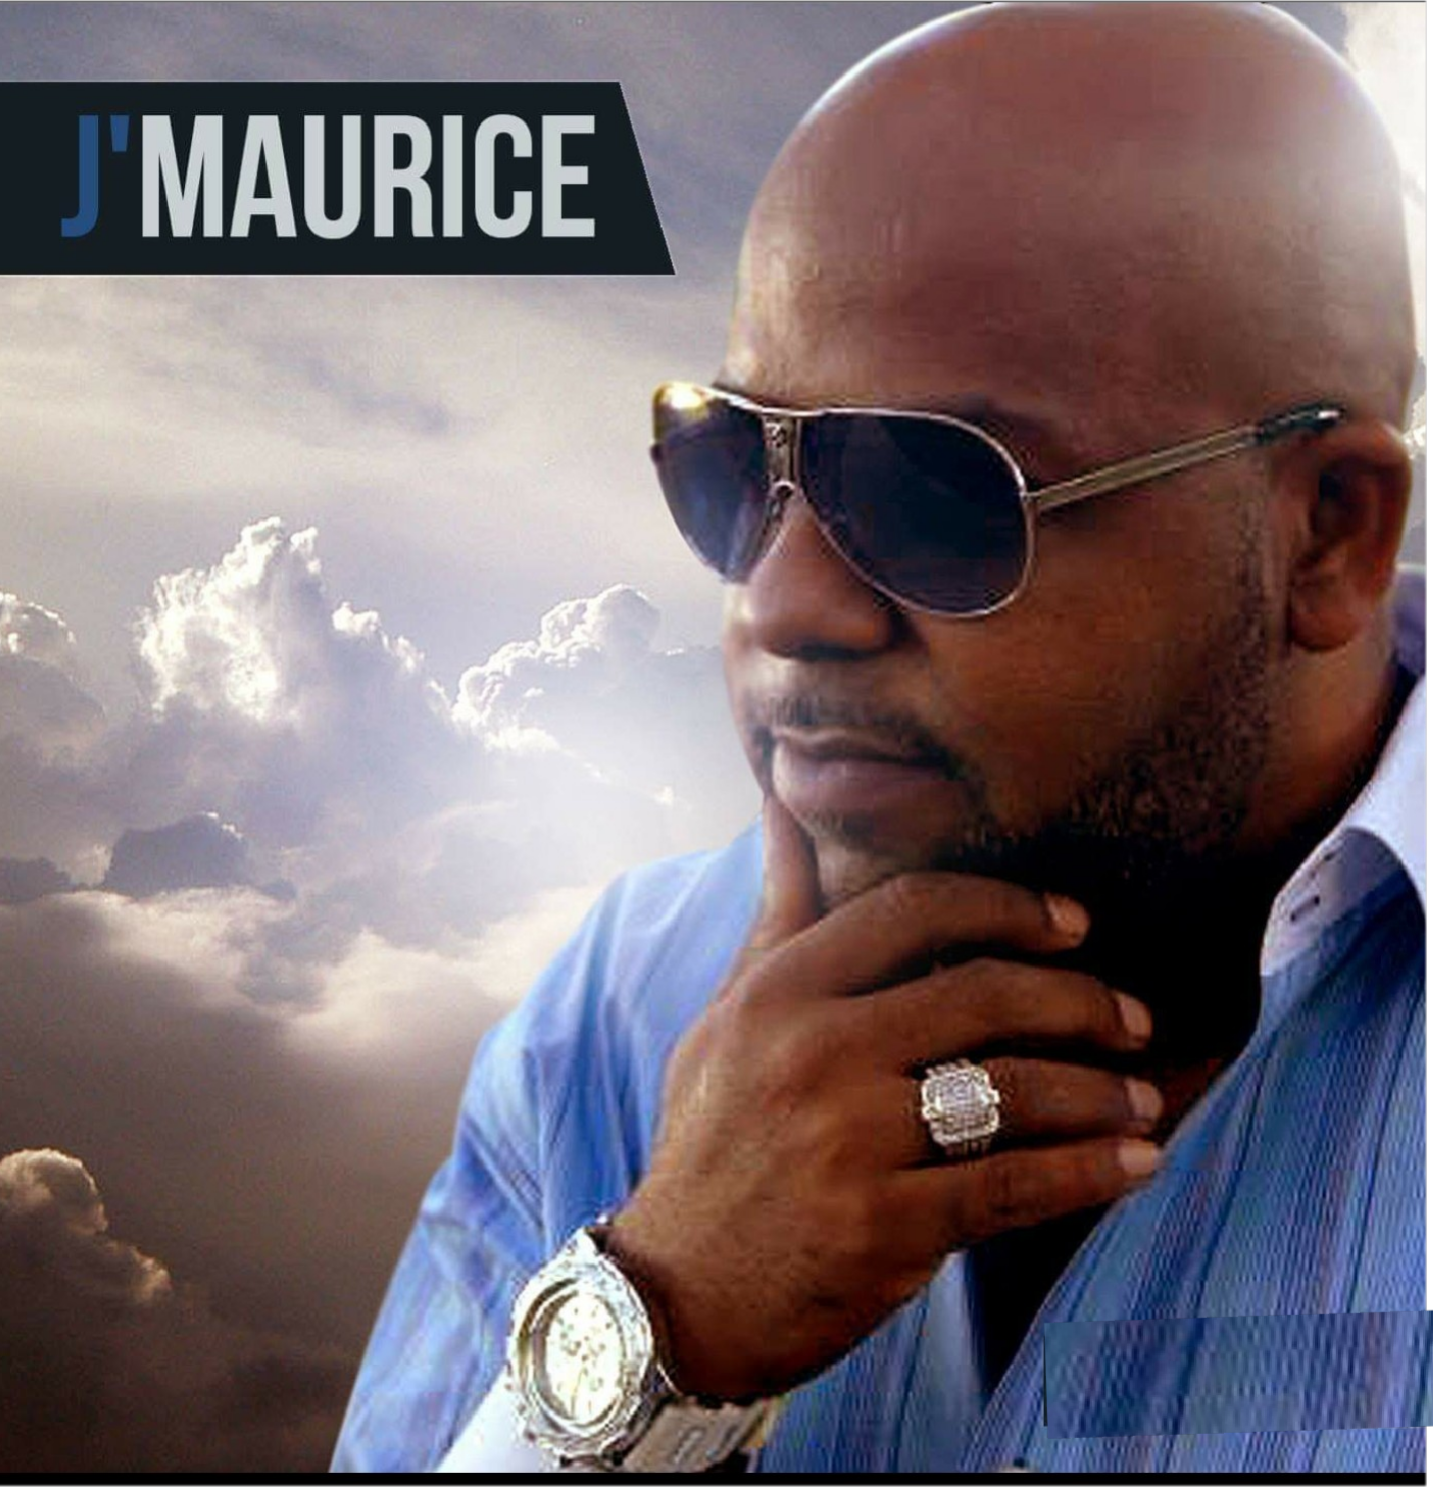 Entertaining but also inspiring and impactful, ‘J.Maurice’ drops a stunning single and video with ‘Beautiful’.